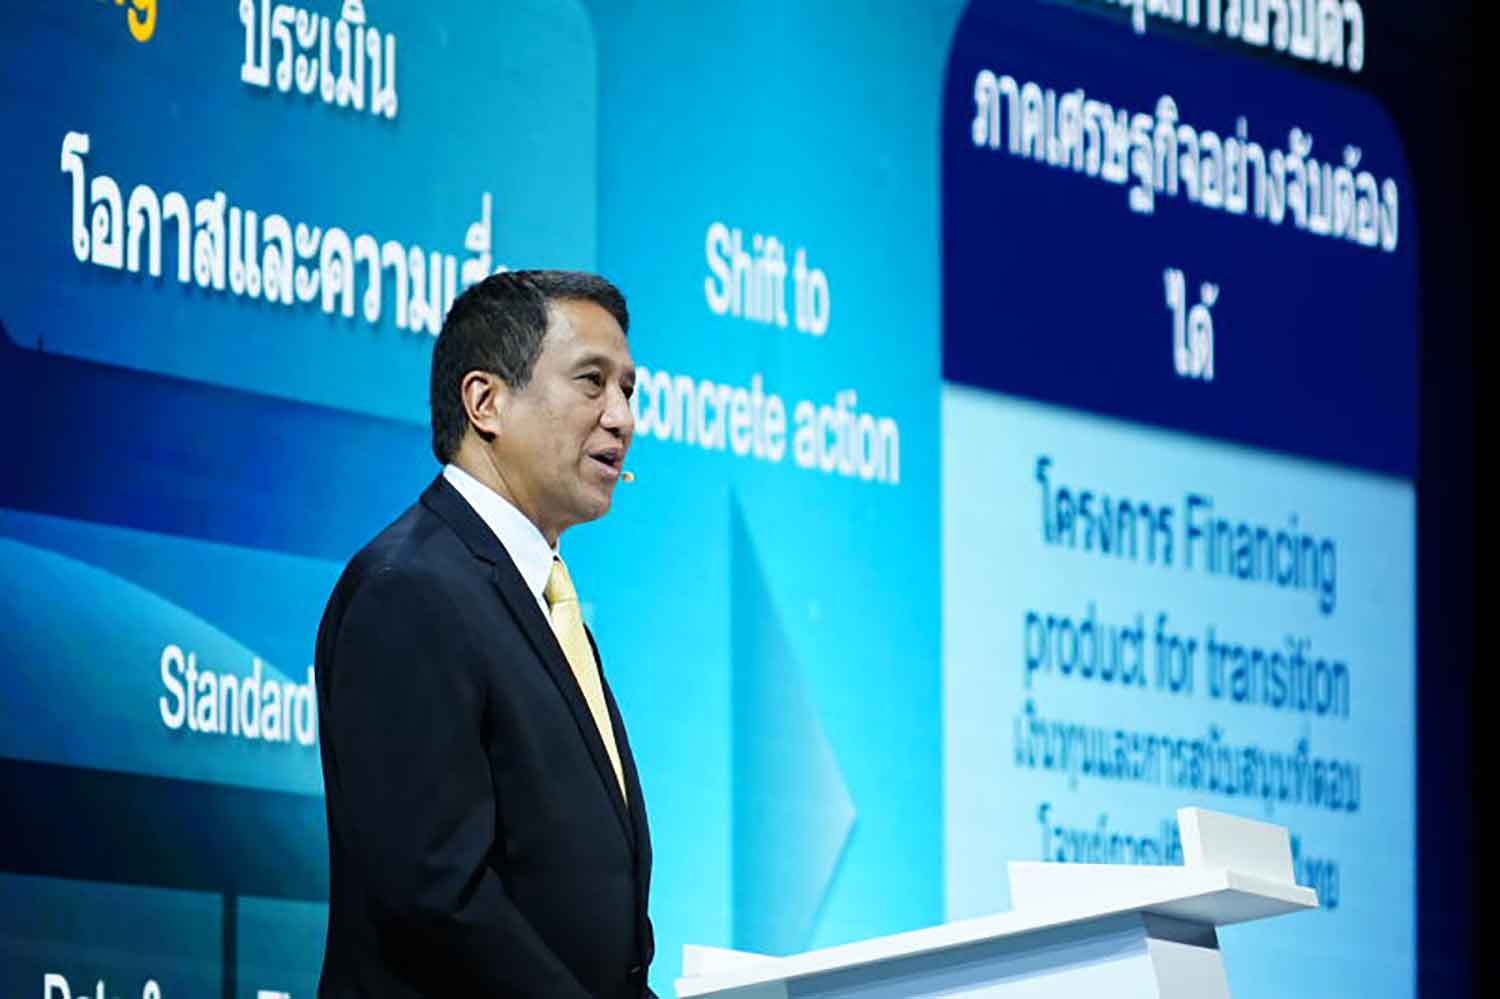 Speaking at a seminar, Mr Ronadol says last year large local banks reported a total of 190 billion baht in green loans.